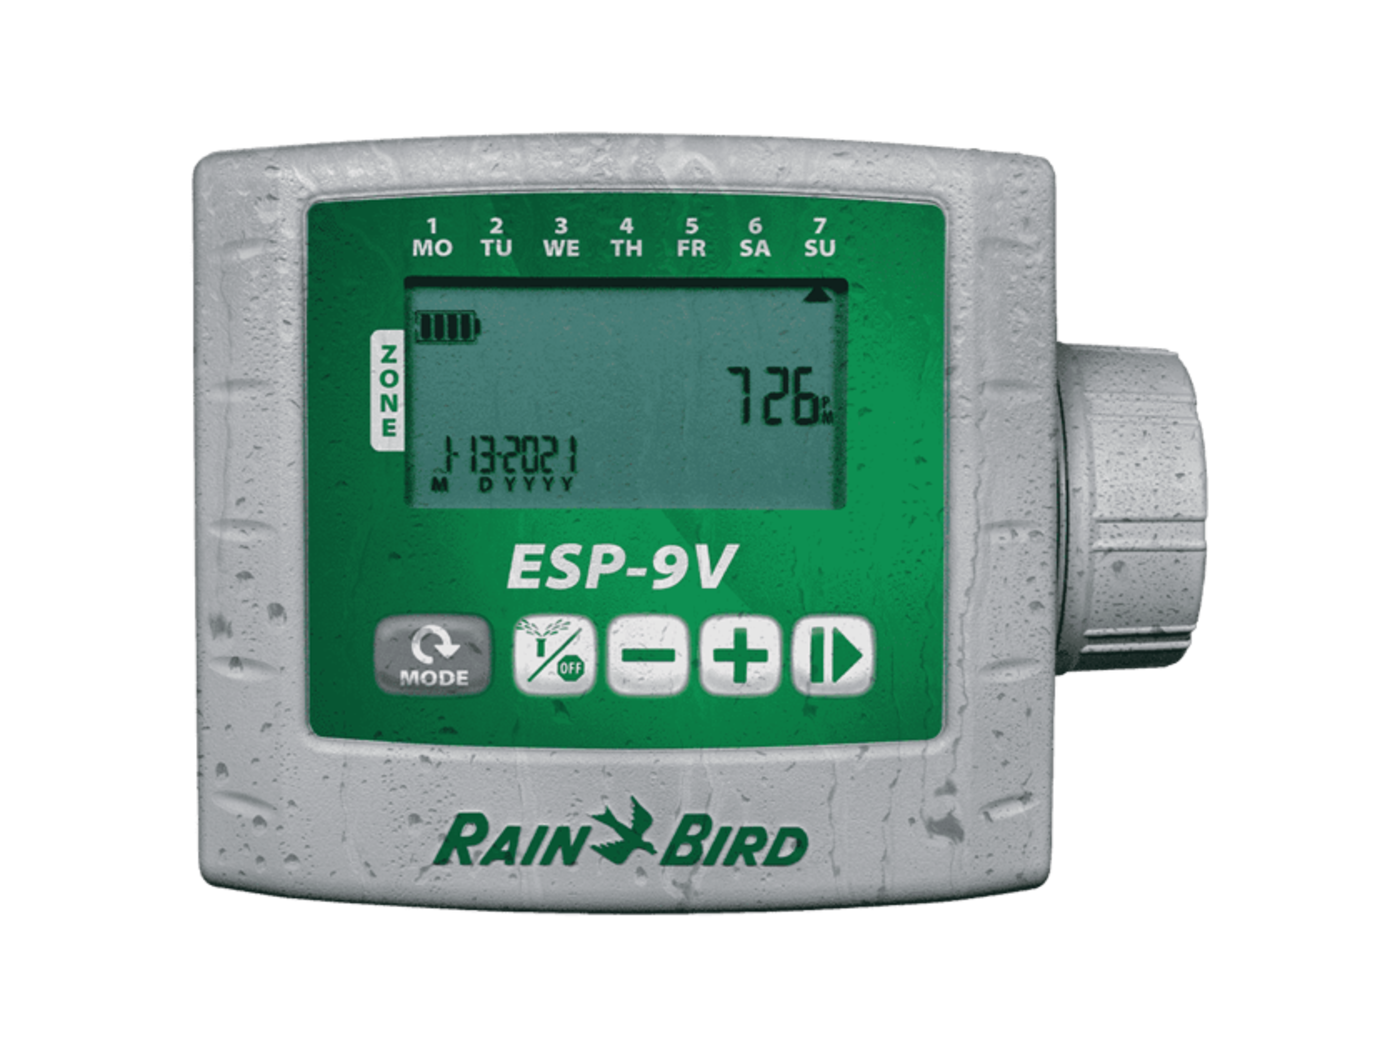 Rain Bird ESP-9V battery-operated irrigation controller with weatherproof keyword to protect against harsh environmental conditions like humidity